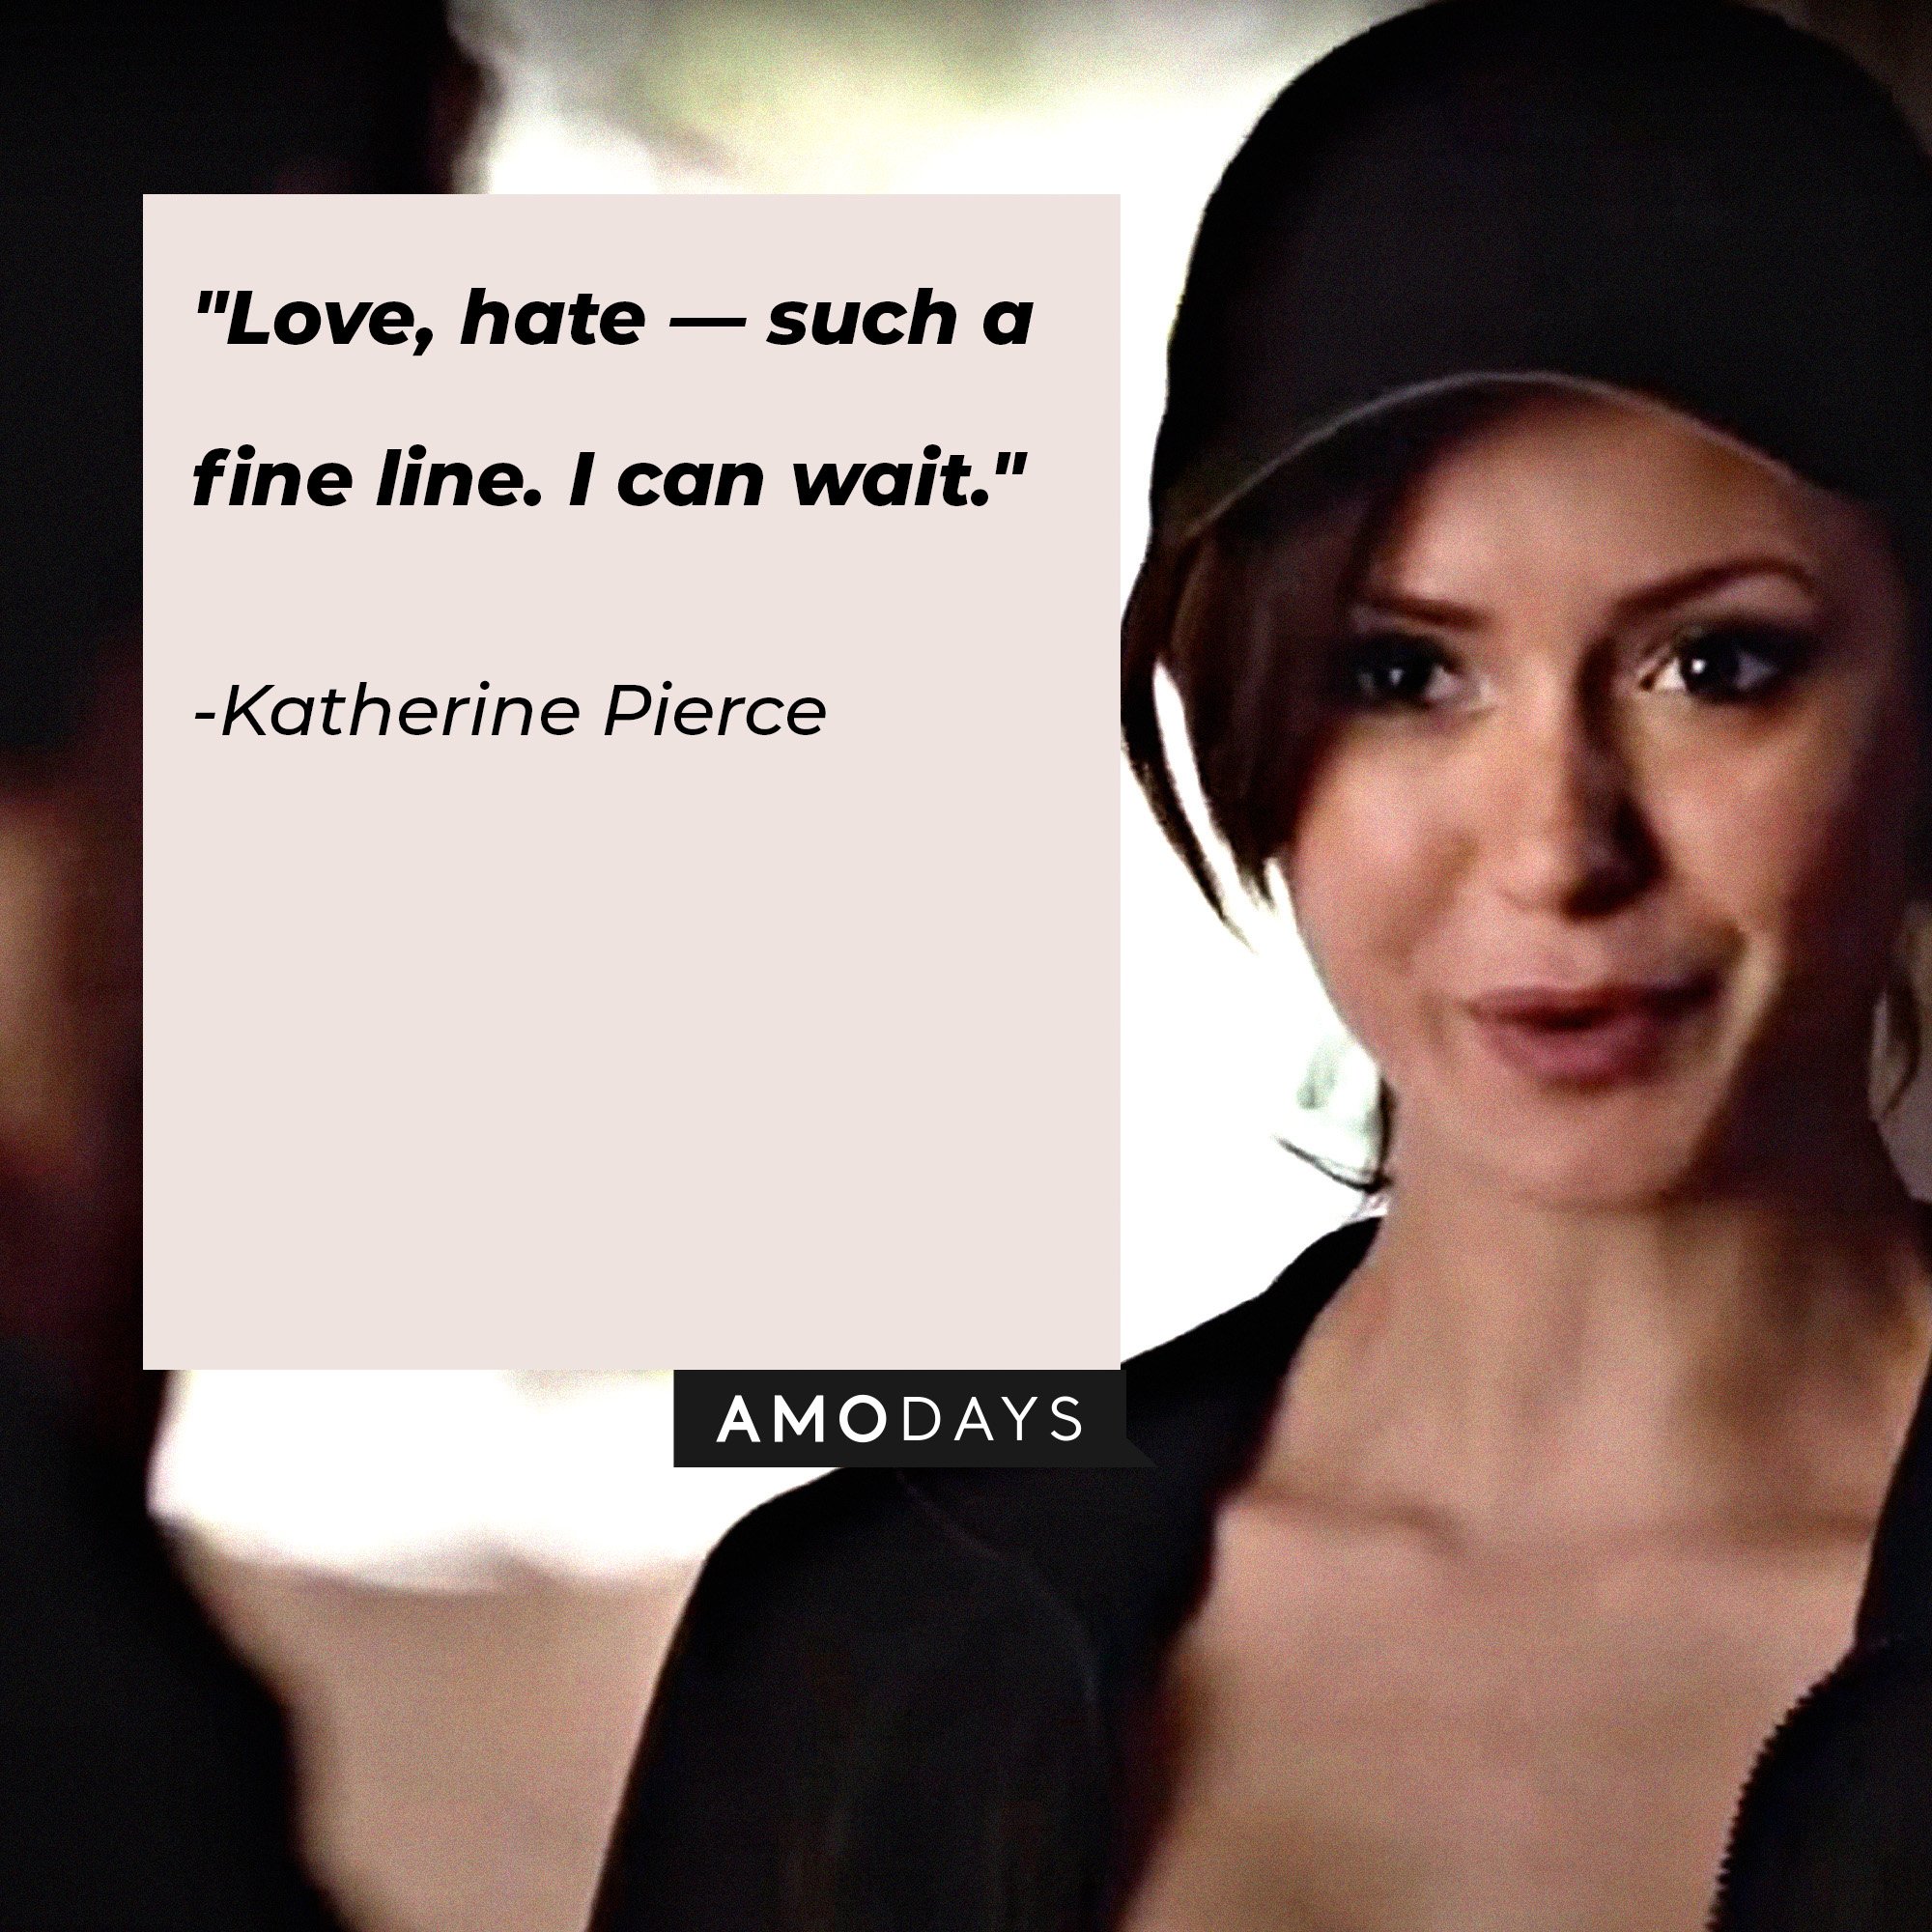 Katherine Pierce's quote: "Love, hate — such a fine line. I can wait." | Image: AmoDays